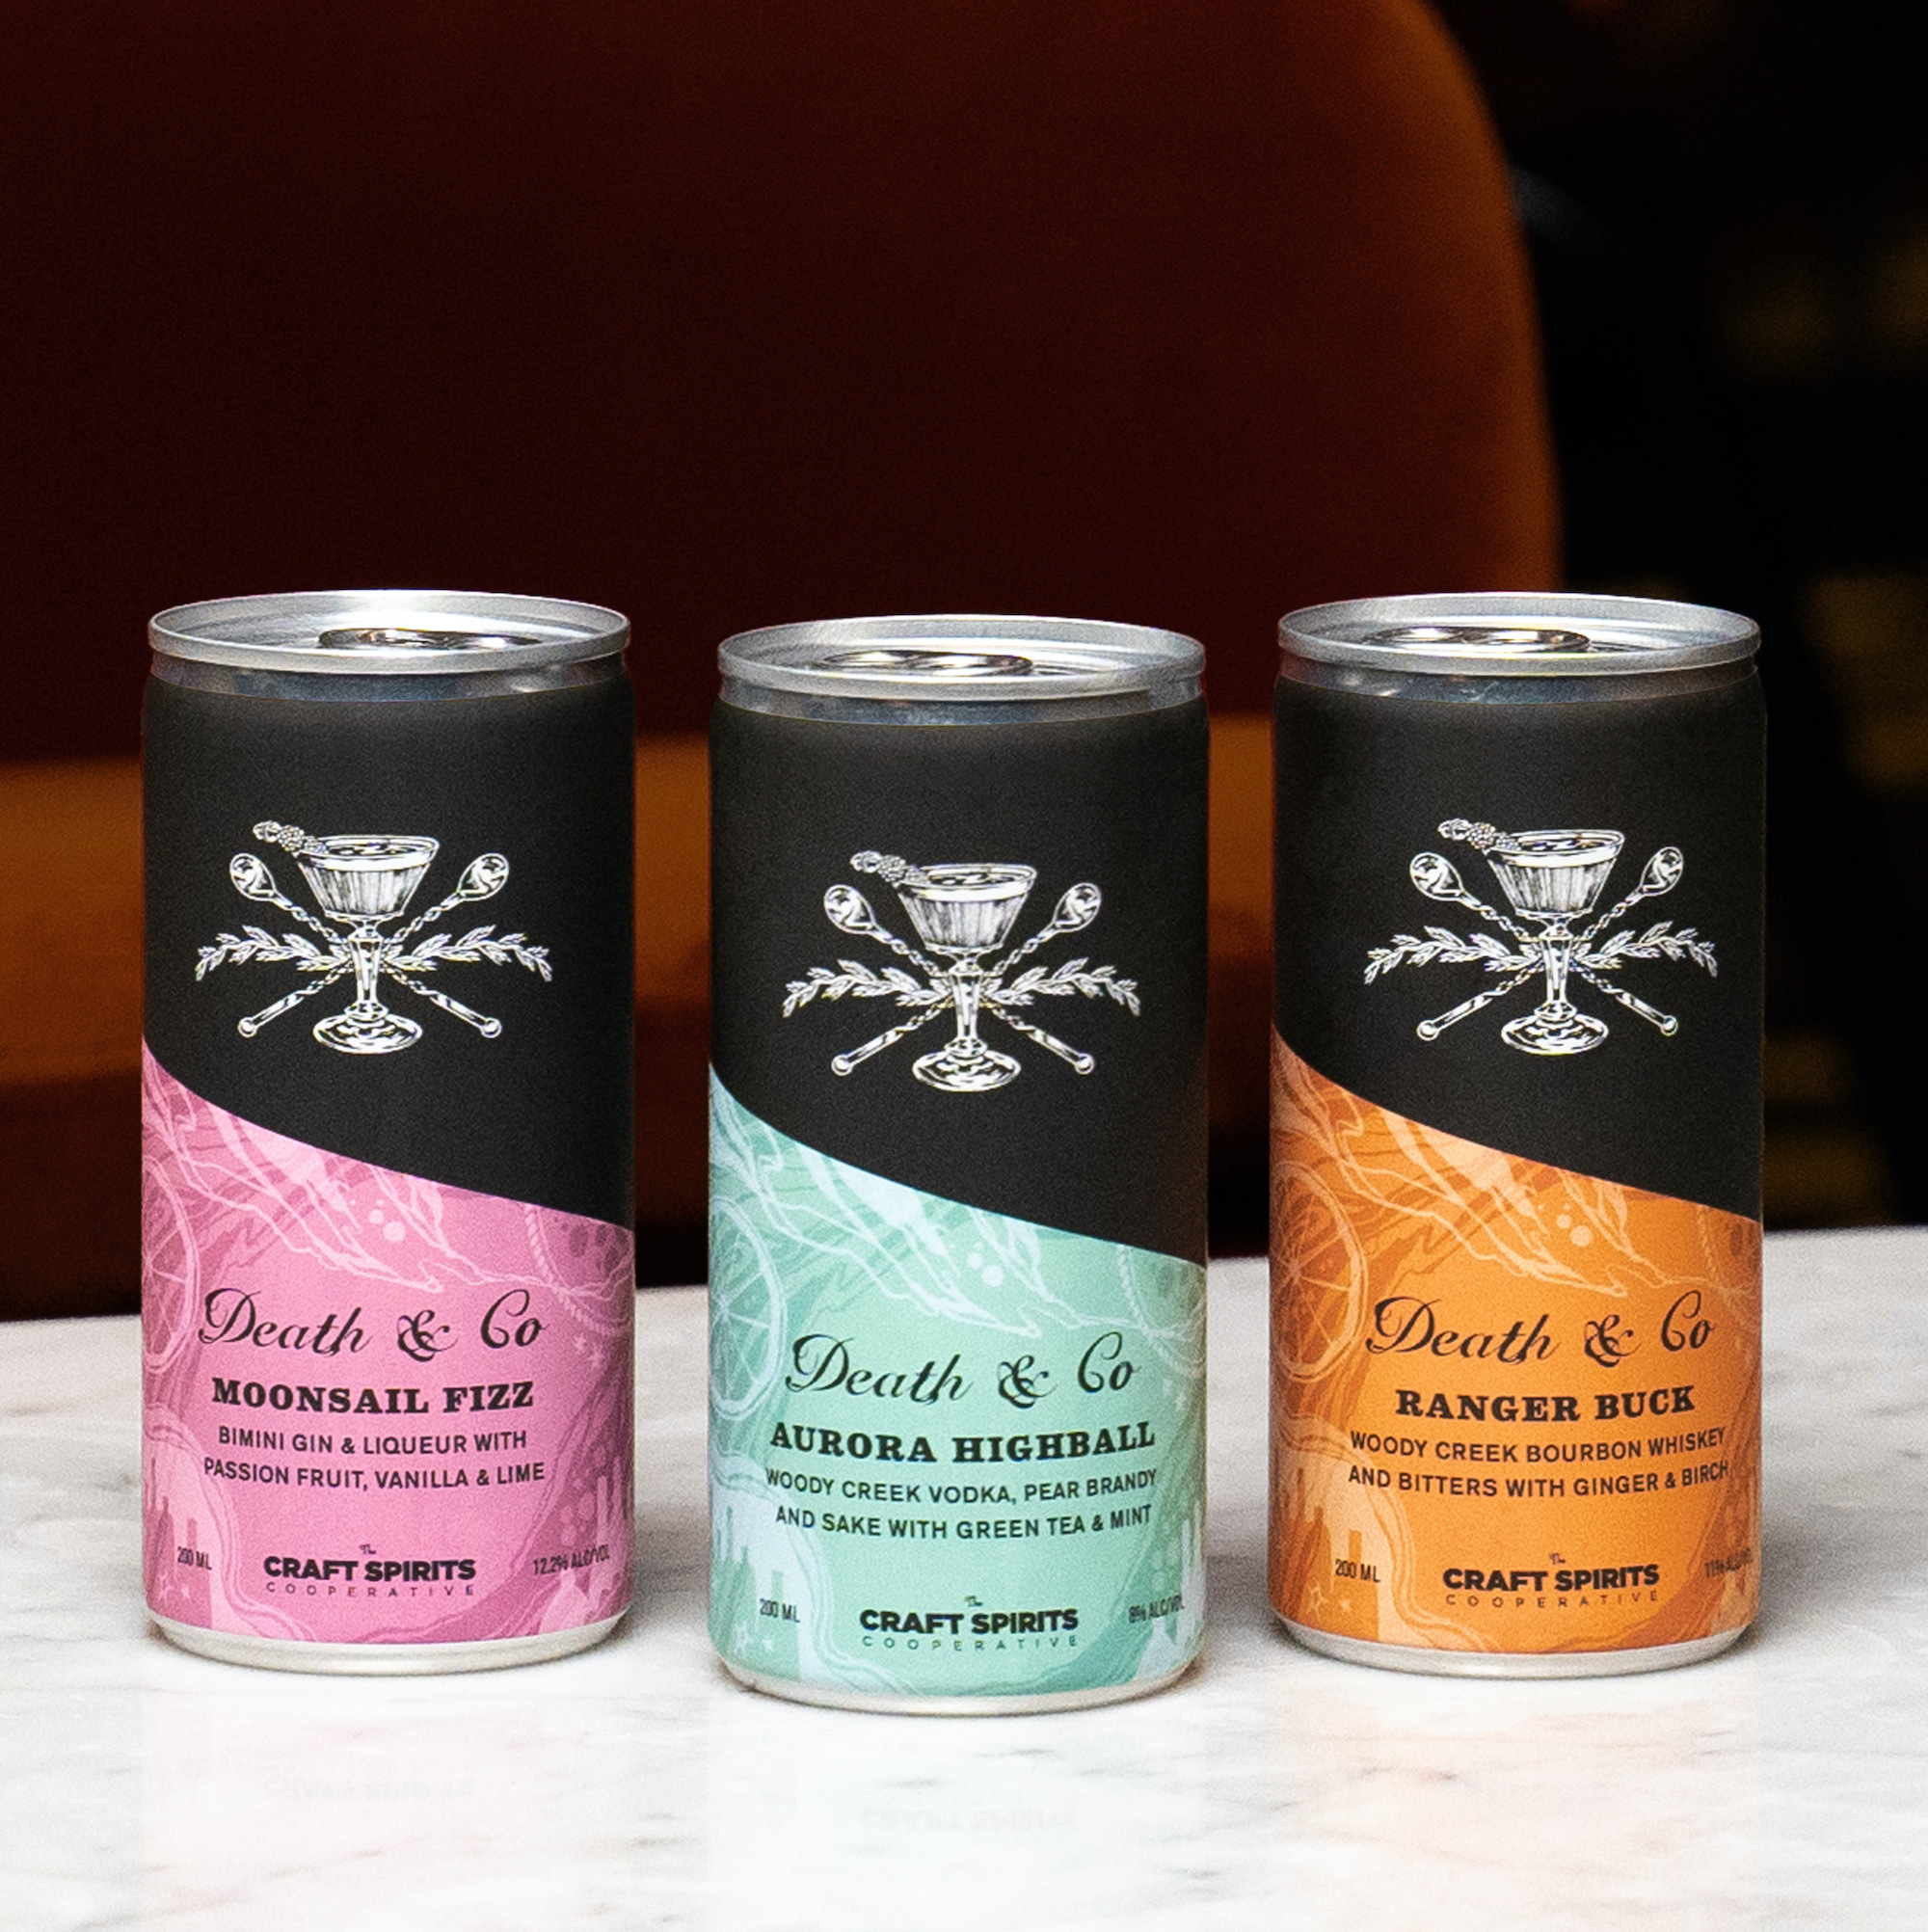 Death & Co canned cocktails